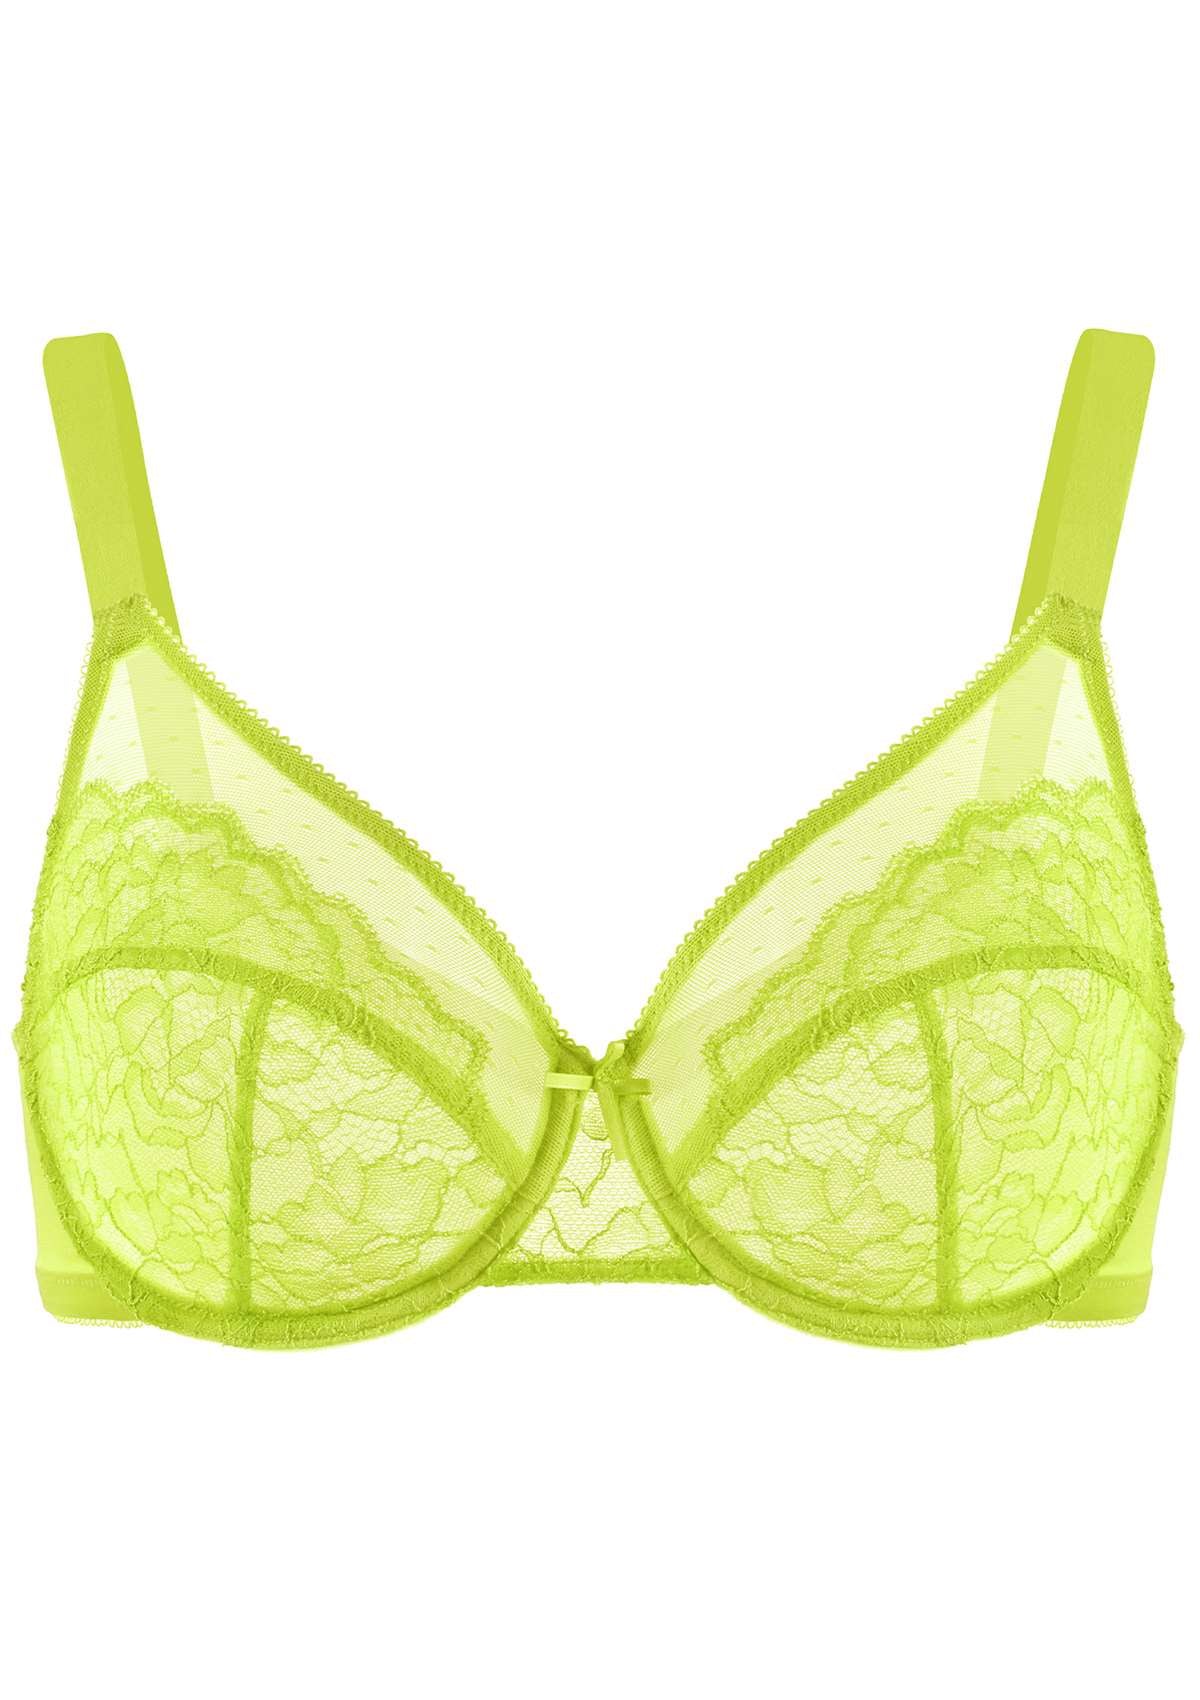 HSIA Enchante Full Cup Minimizing Bra: Supportive Unlined Lace Bra - Lime Green / 42 / D